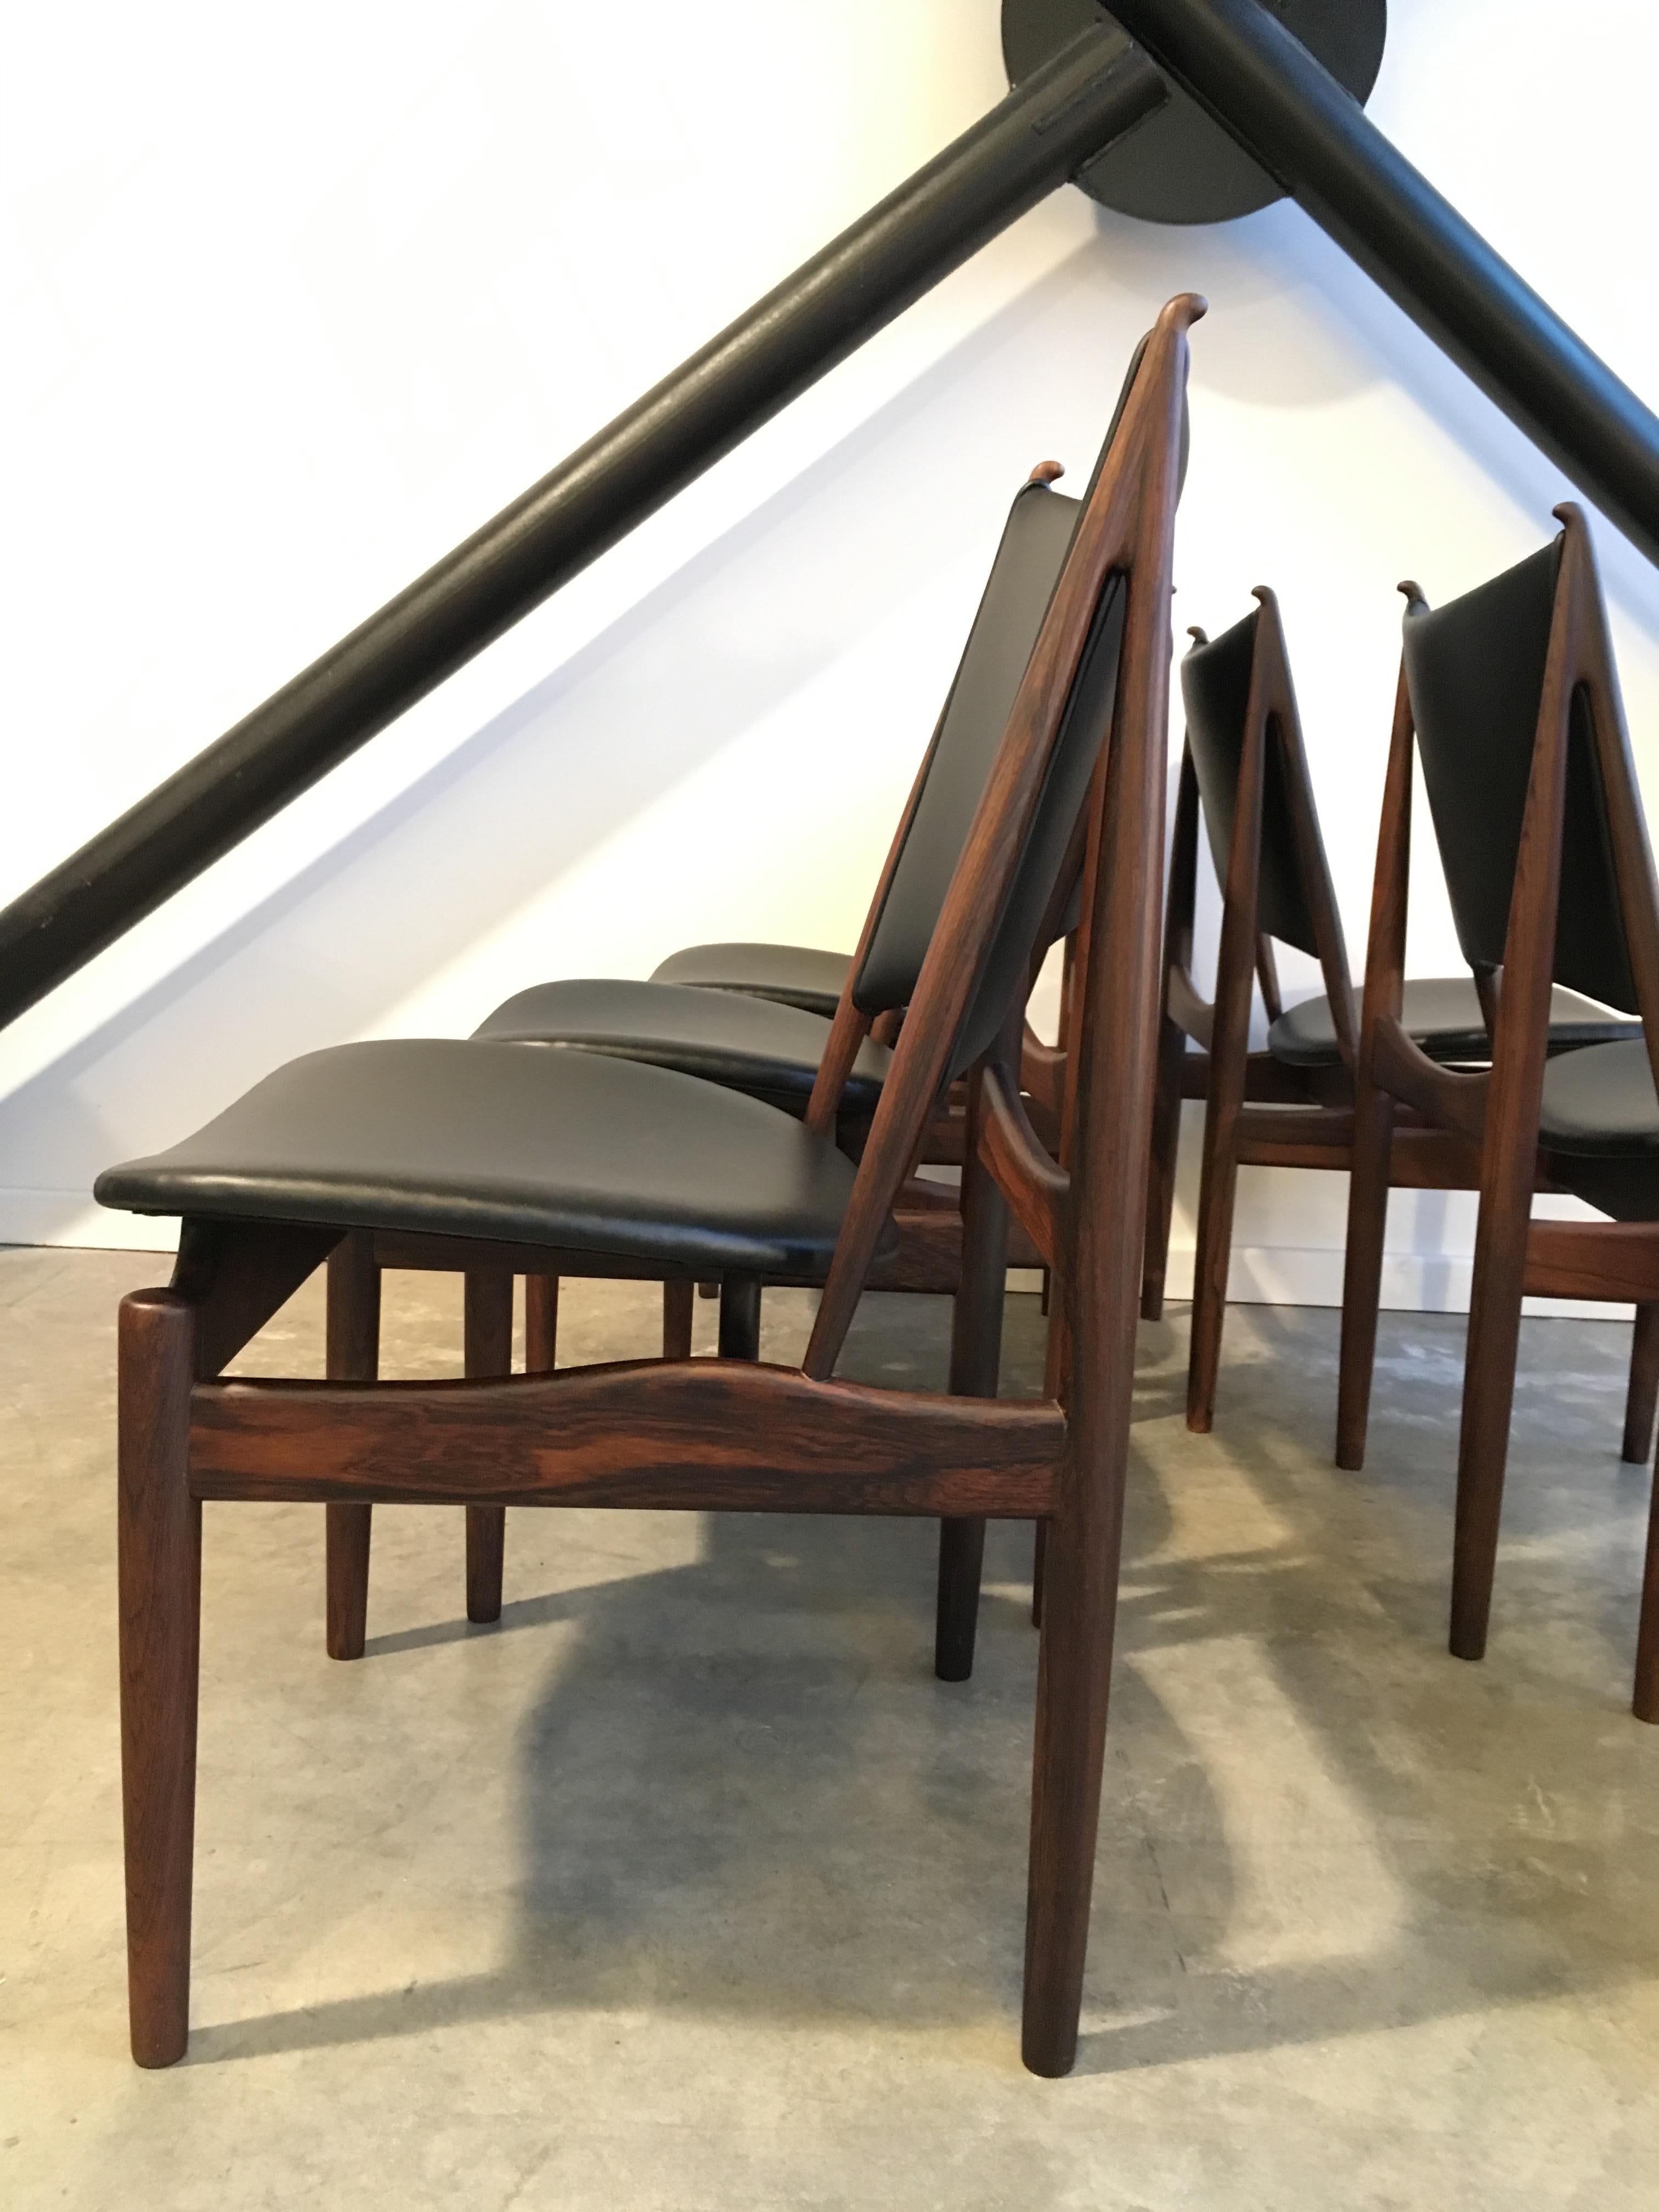 Authentic Egyptian chairs by Finn Juhl for Niels Vodder in rosewood and leather. Beautiful restored condition with some repairs.